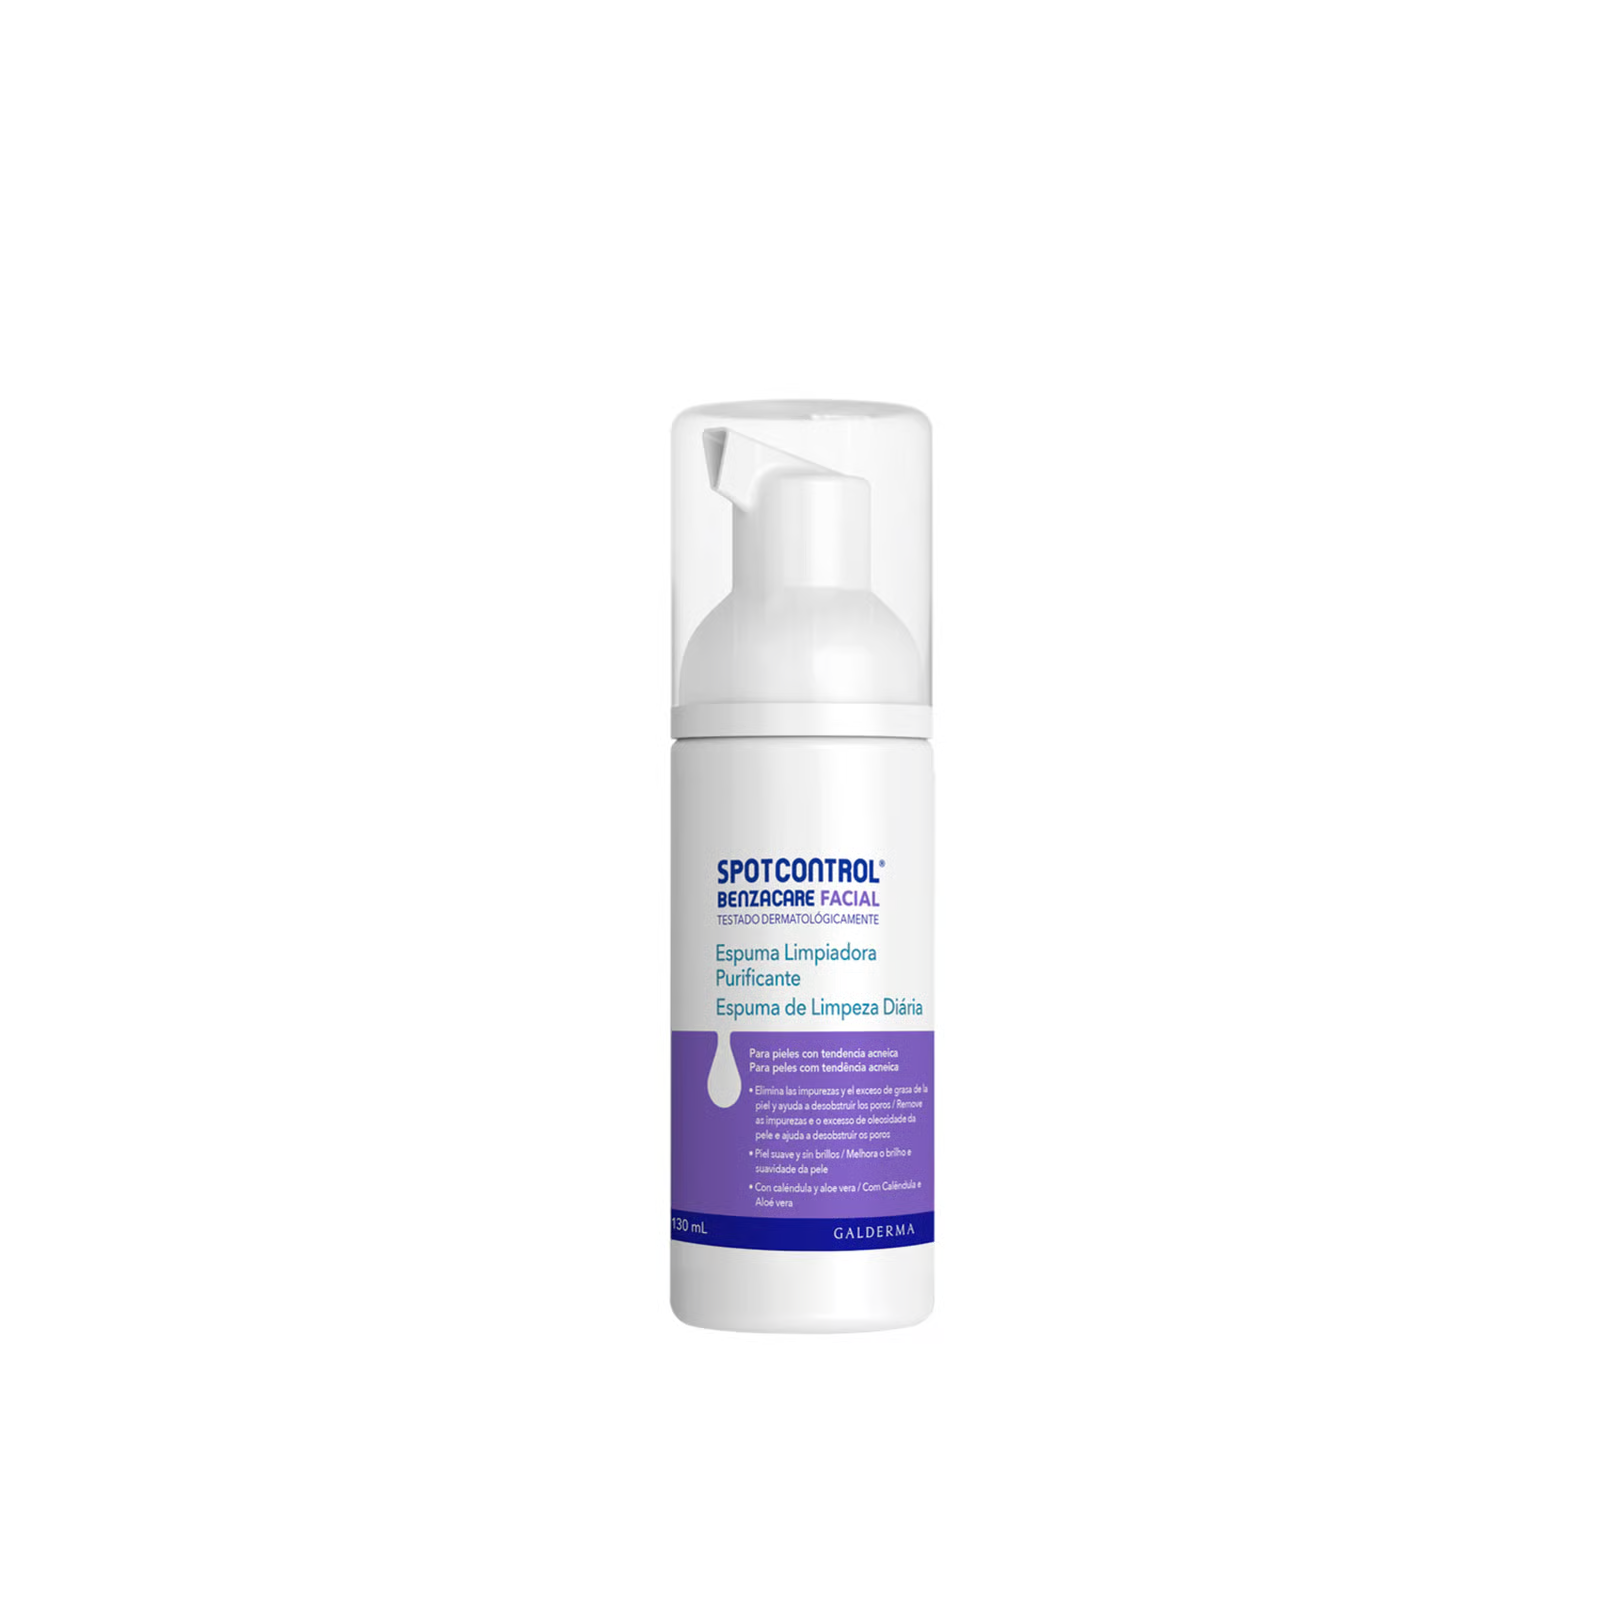 Benzacare Spotcontrol Daily Facial Cleansing Foam 130ml